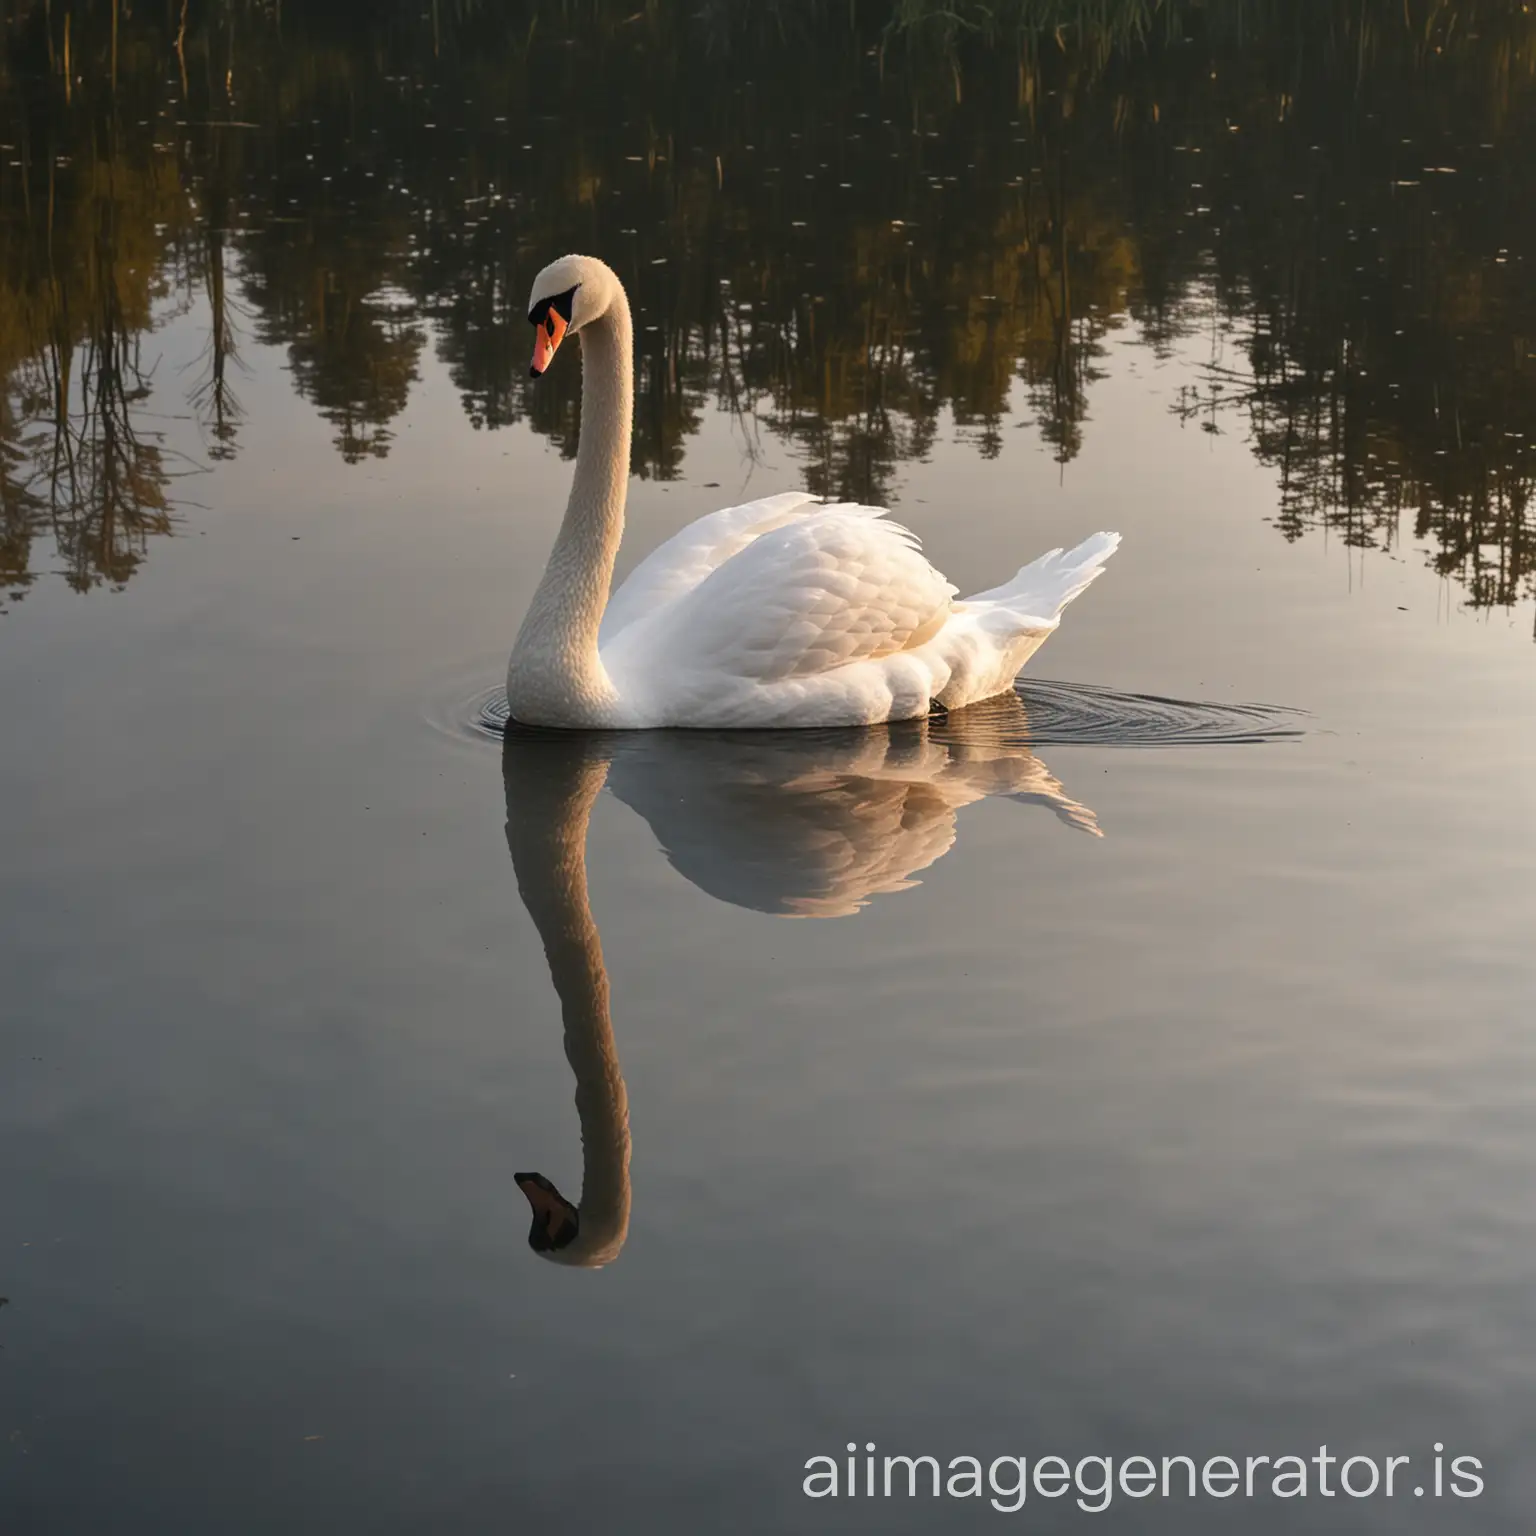 A graceful swan floating across a lake's mirror-like surface in the early morning